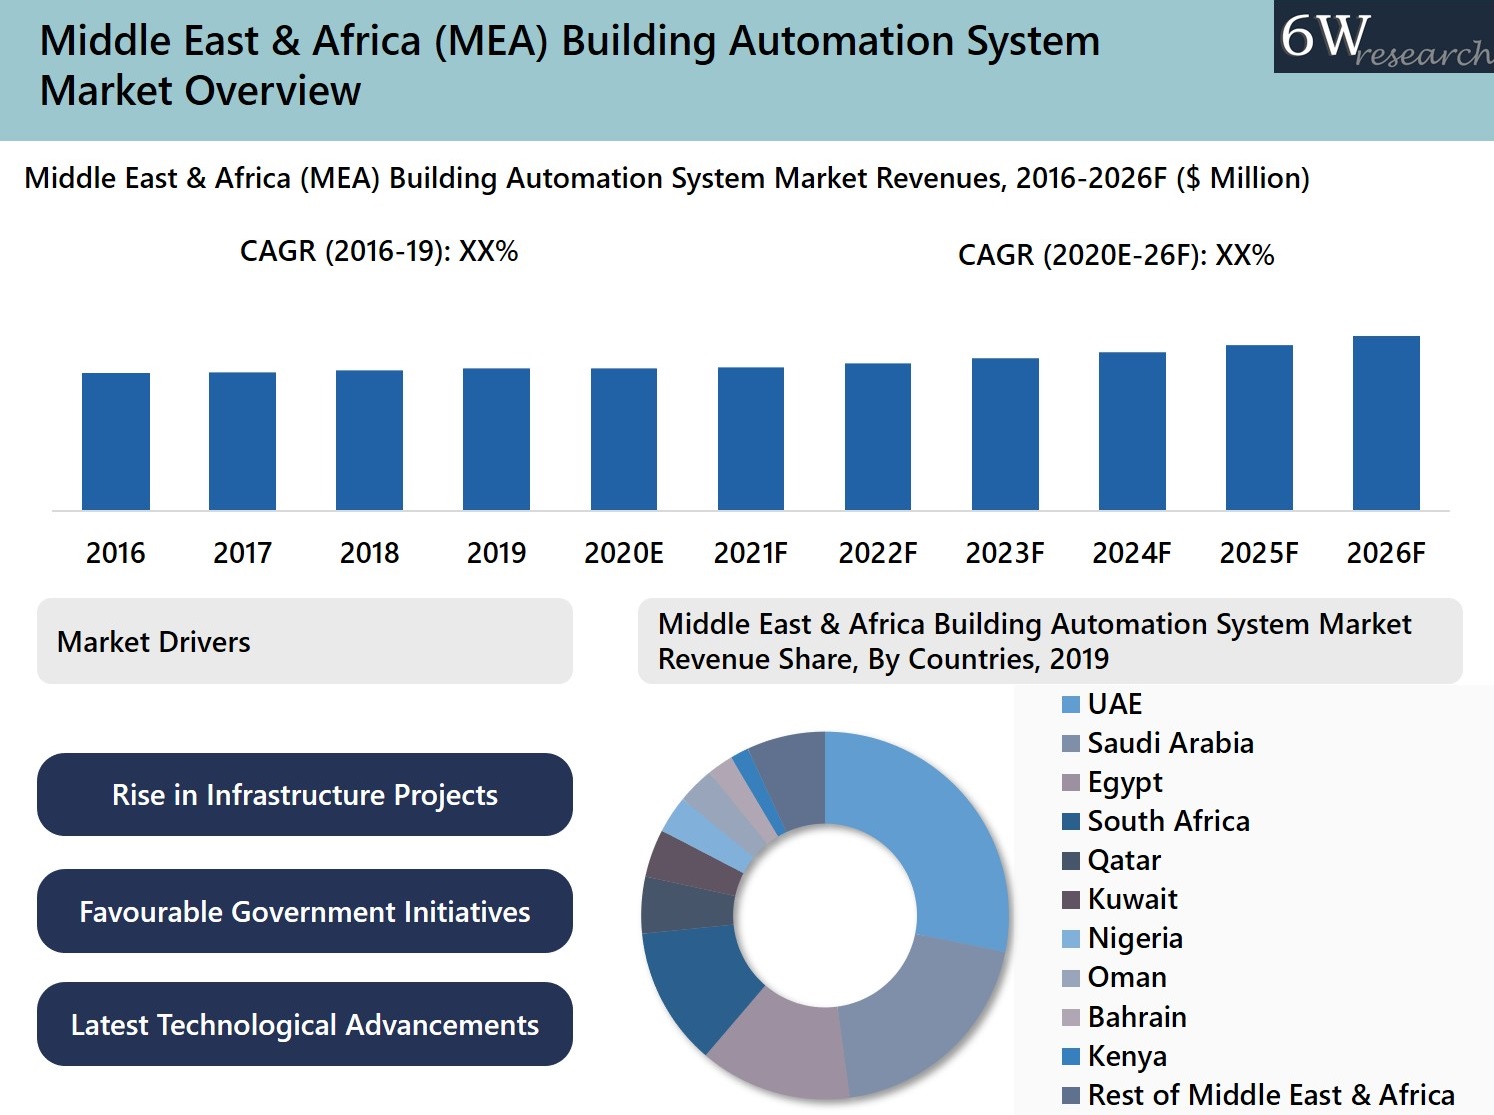 Middle East & Africa (MEA) Building Automation System Market 